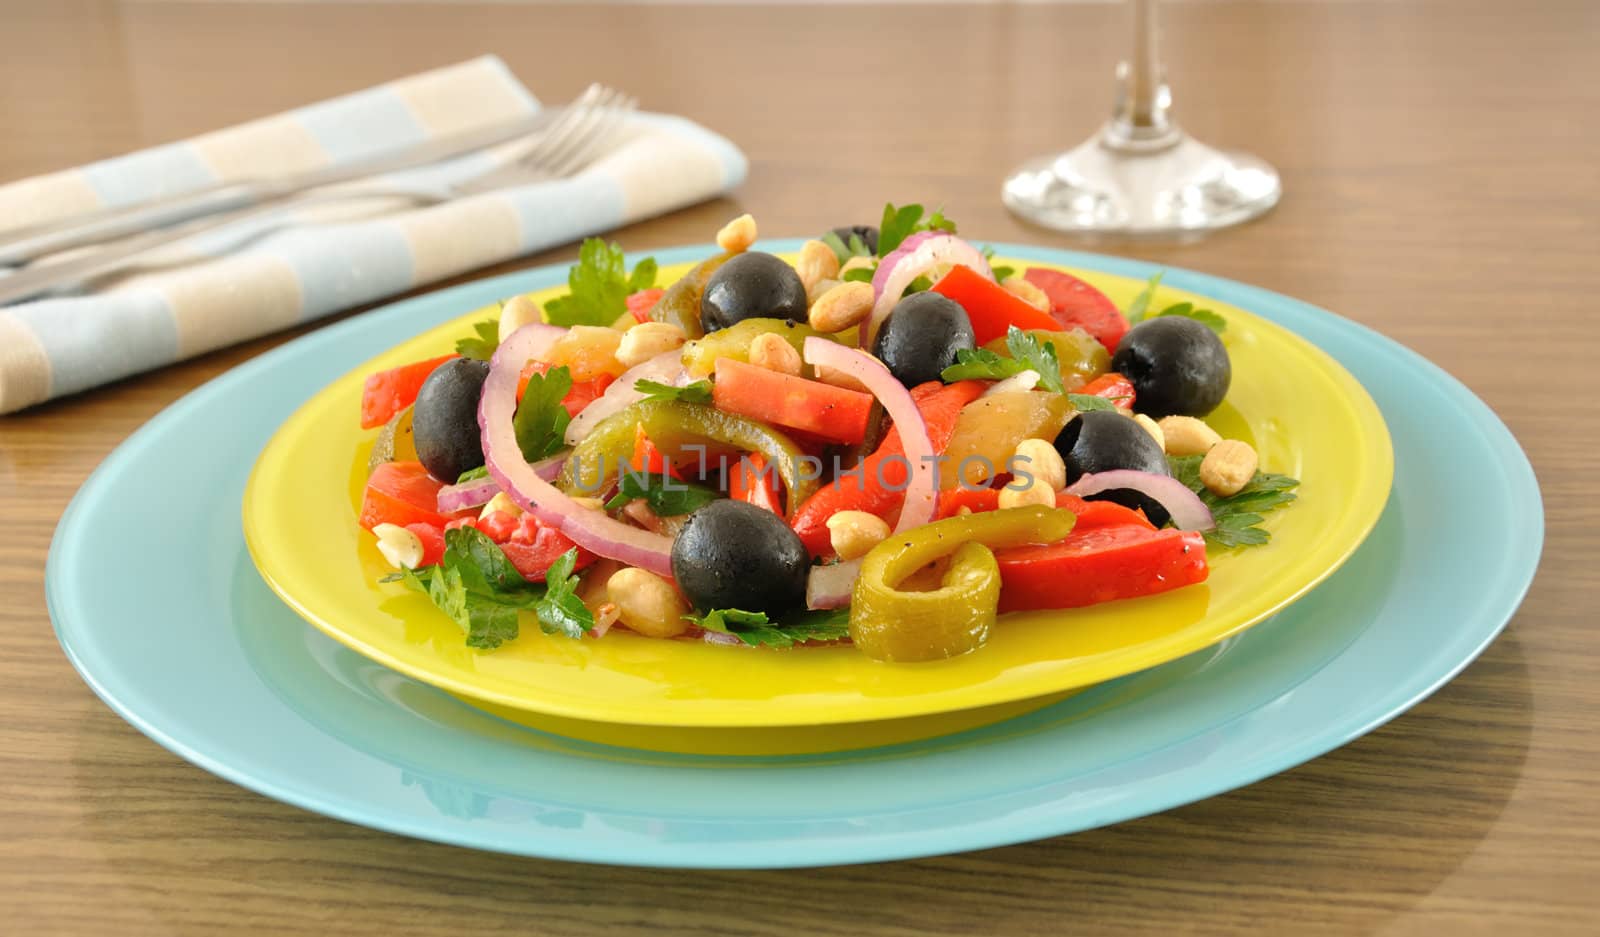 Salad of roasted peppers with tomato, peanuts and olives, onions and greens 